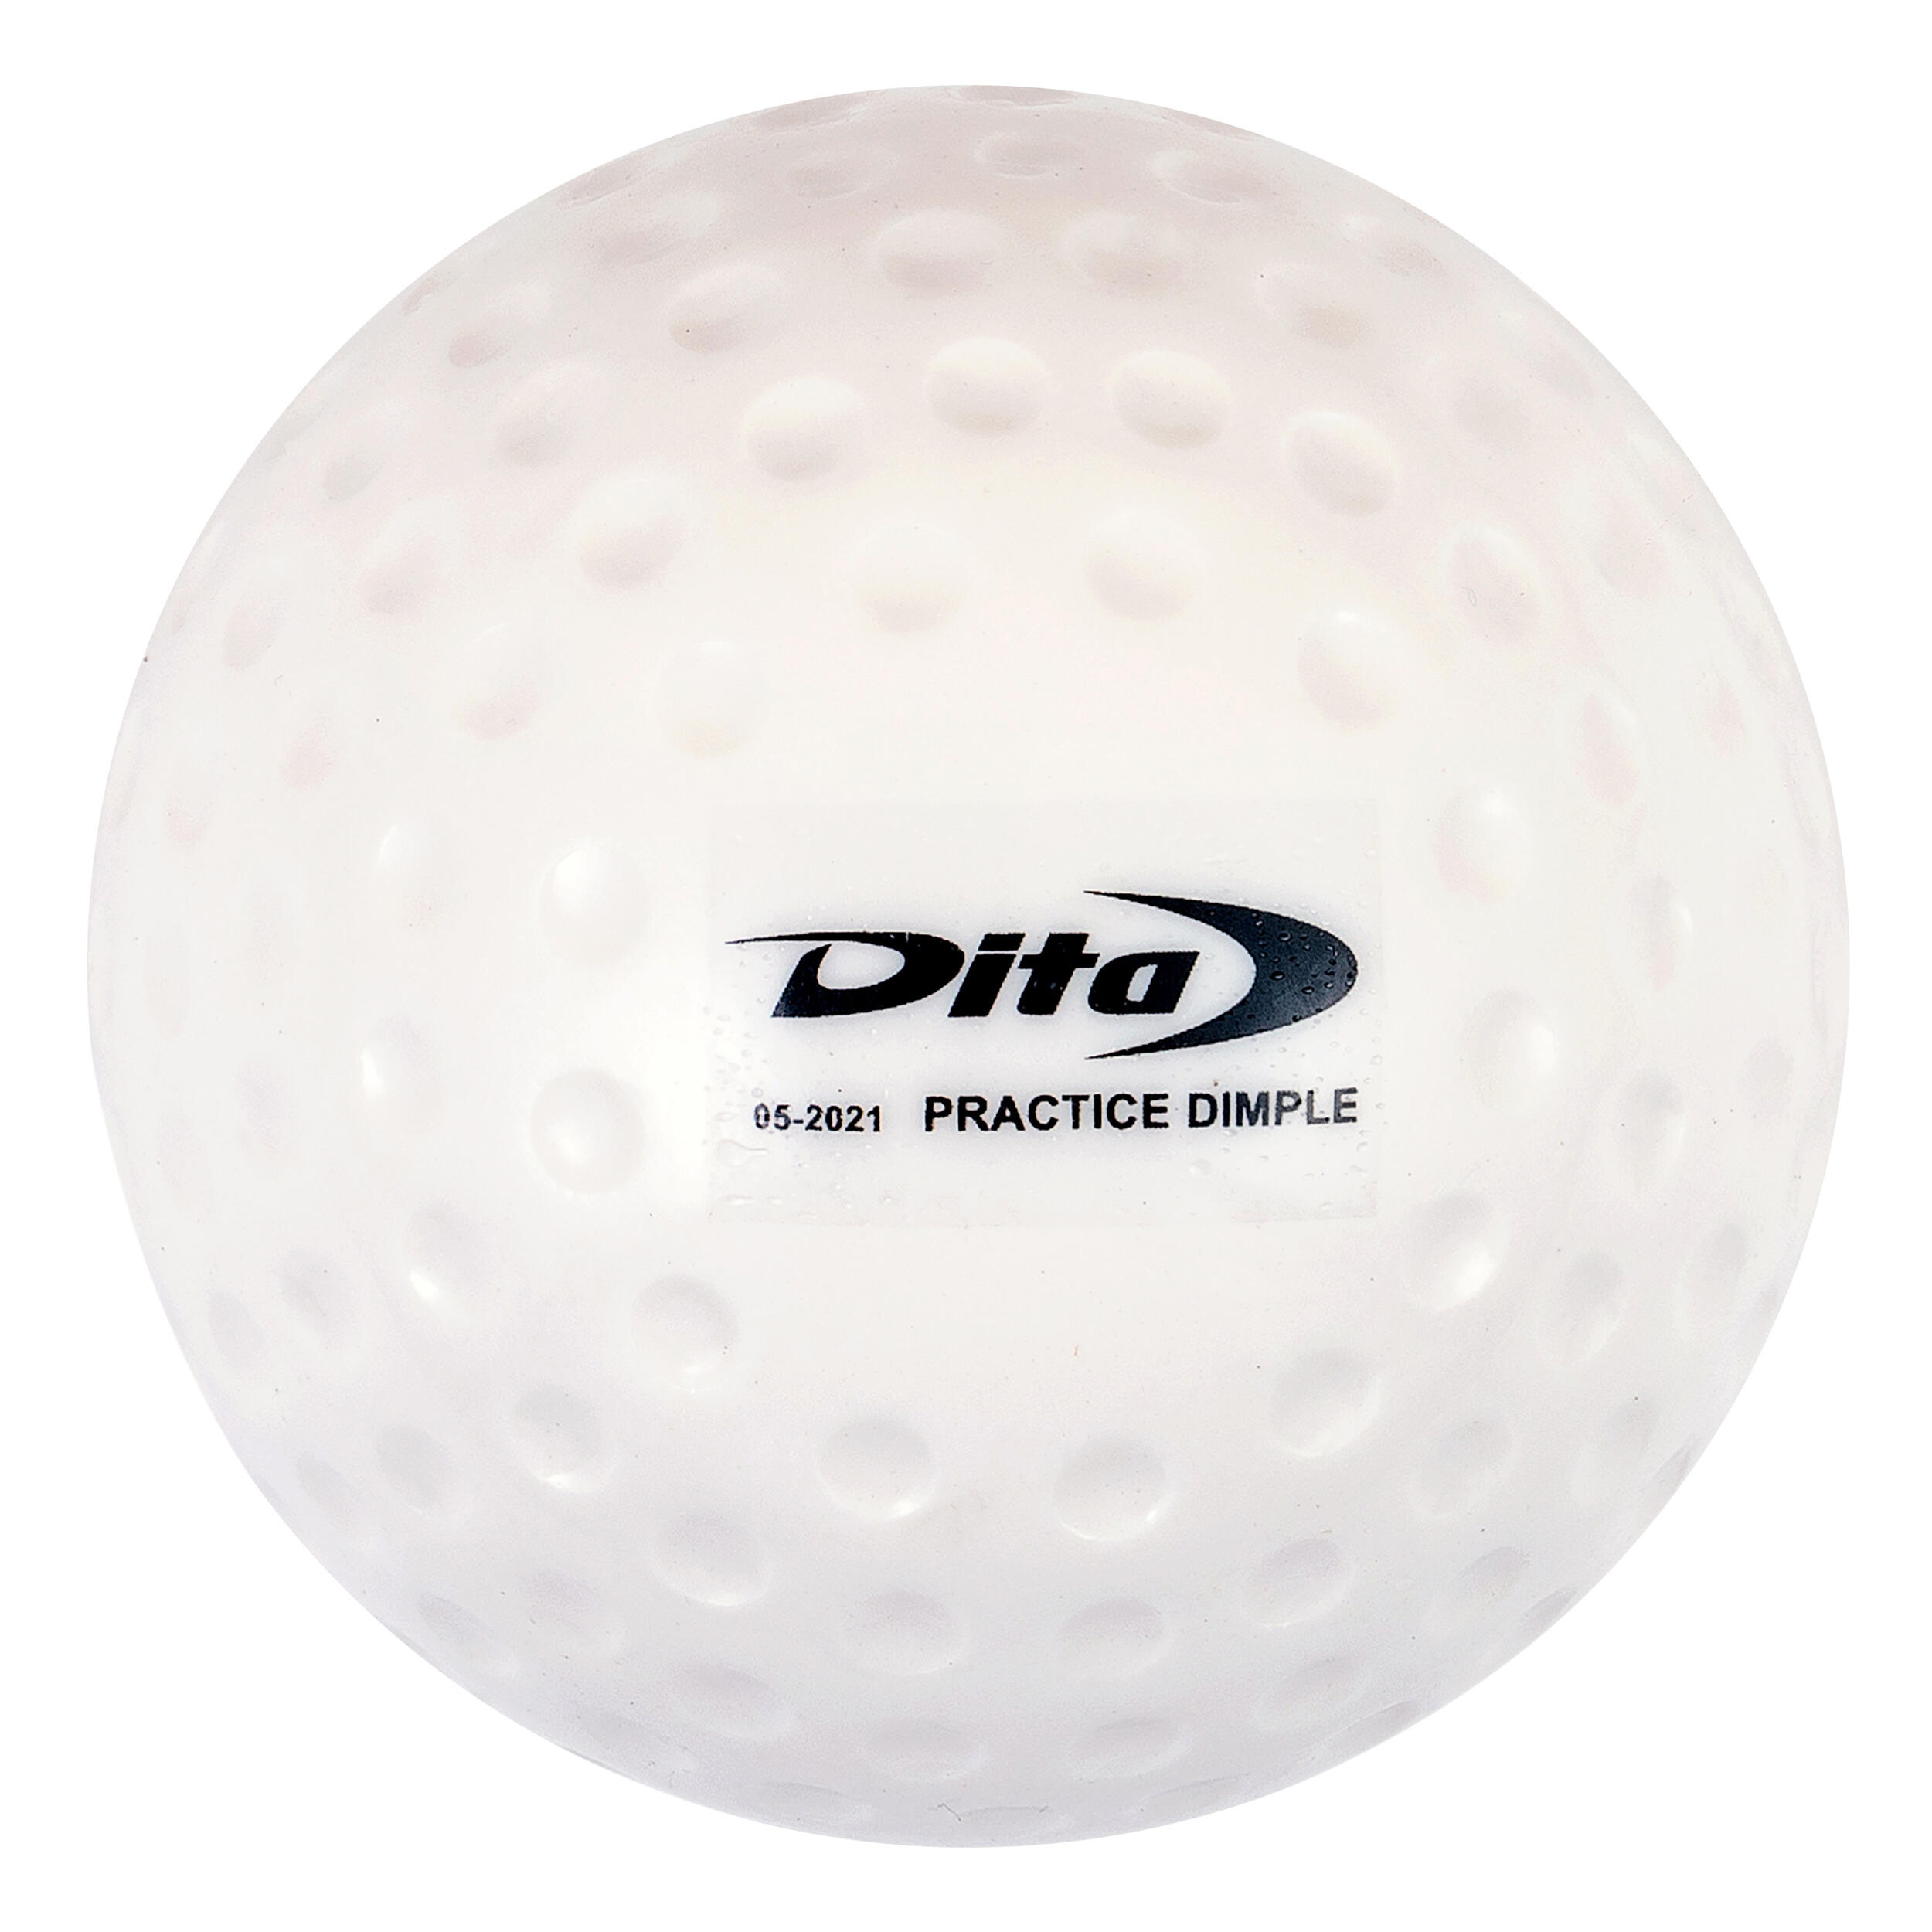 Dimpled Field Hockey Ball Practice - White 1/3